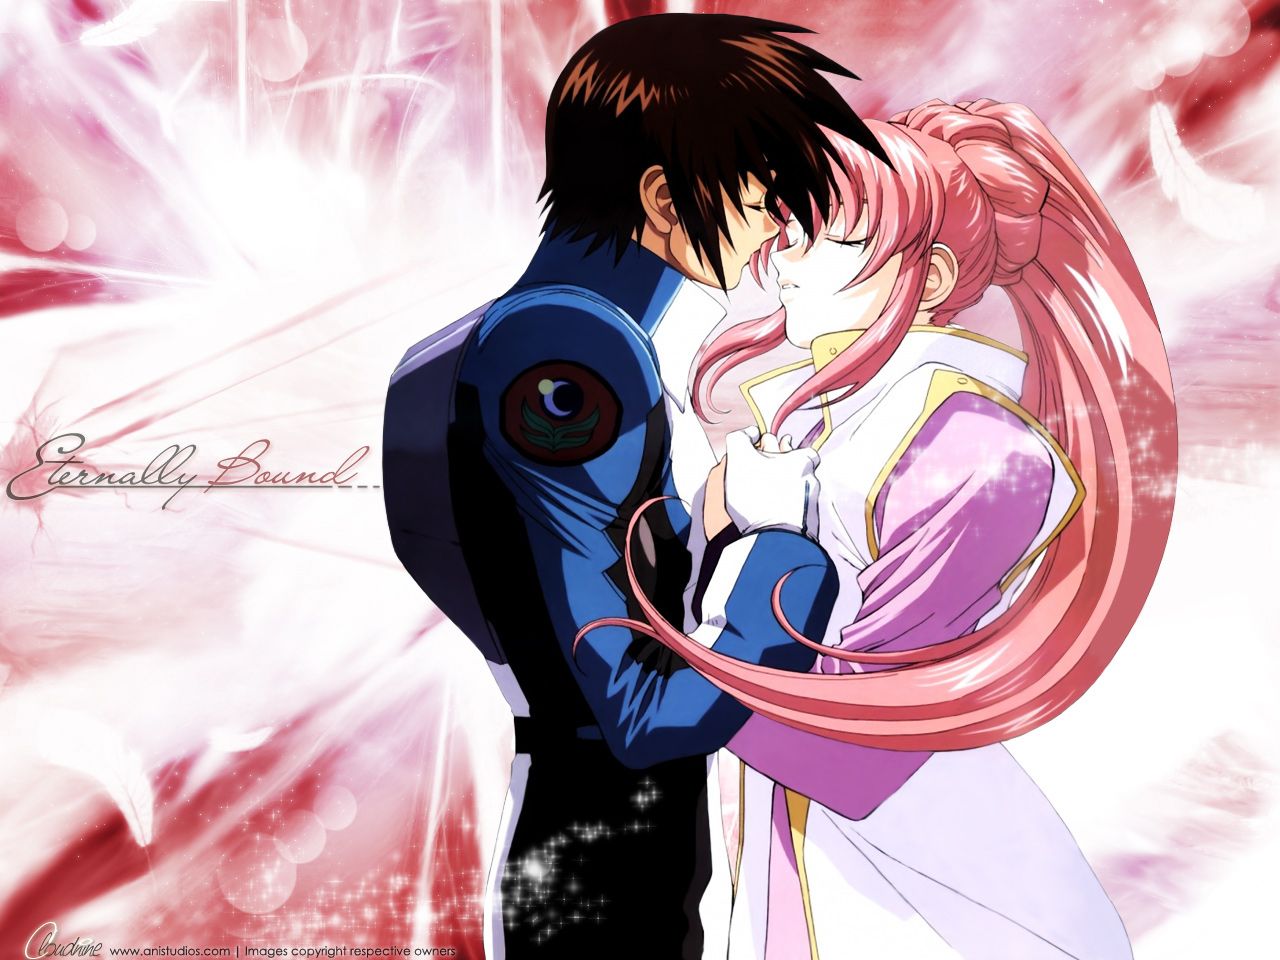 claire calimag recommends Kira And Lacus Kiss